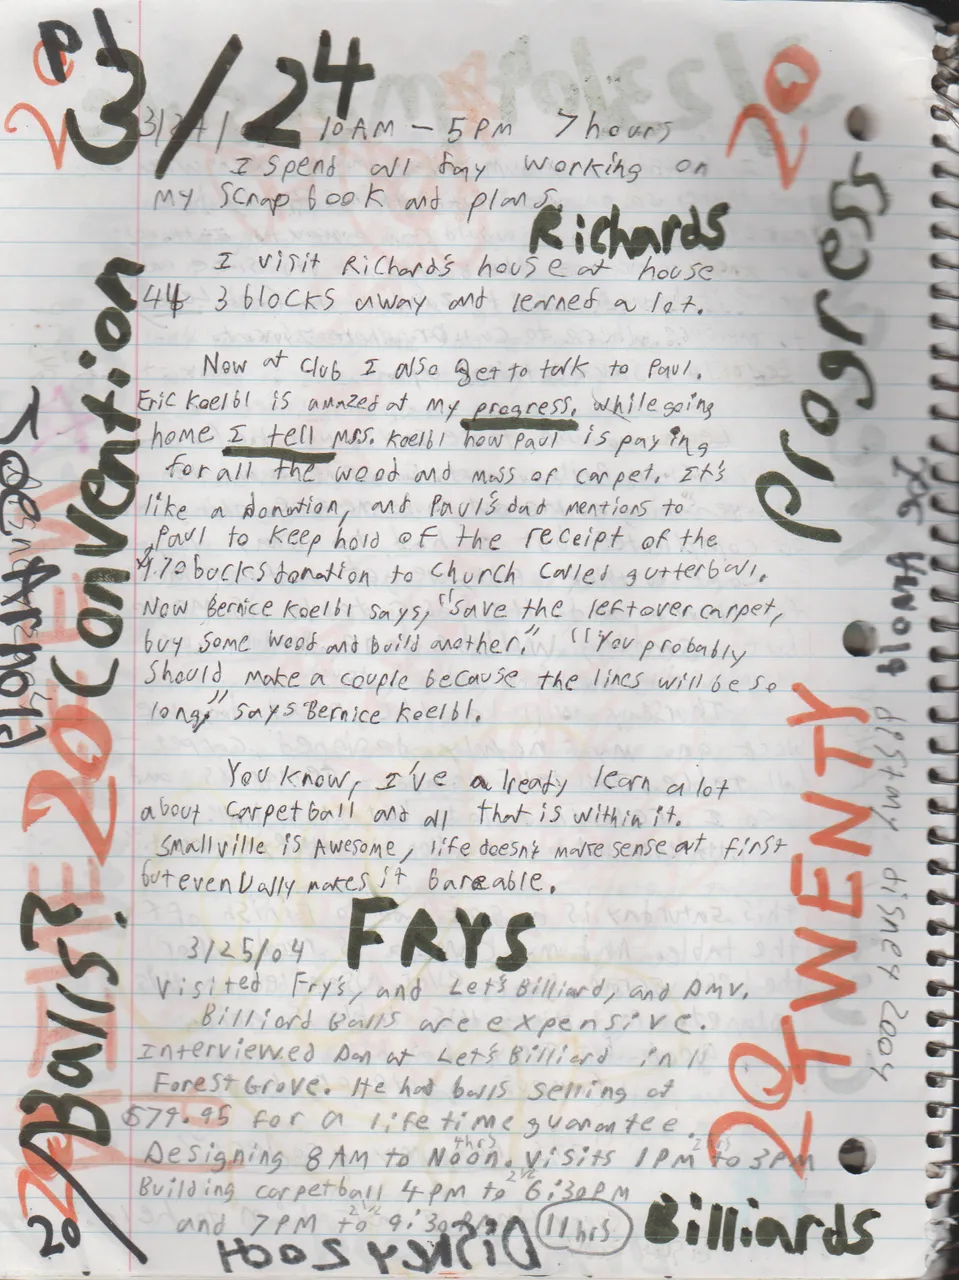 2004-01-29 - Thursday - Carpetball FGHS Senior Project Journal, Joey Arnold, Part 02, 96pages numbered, Notebook-15.png